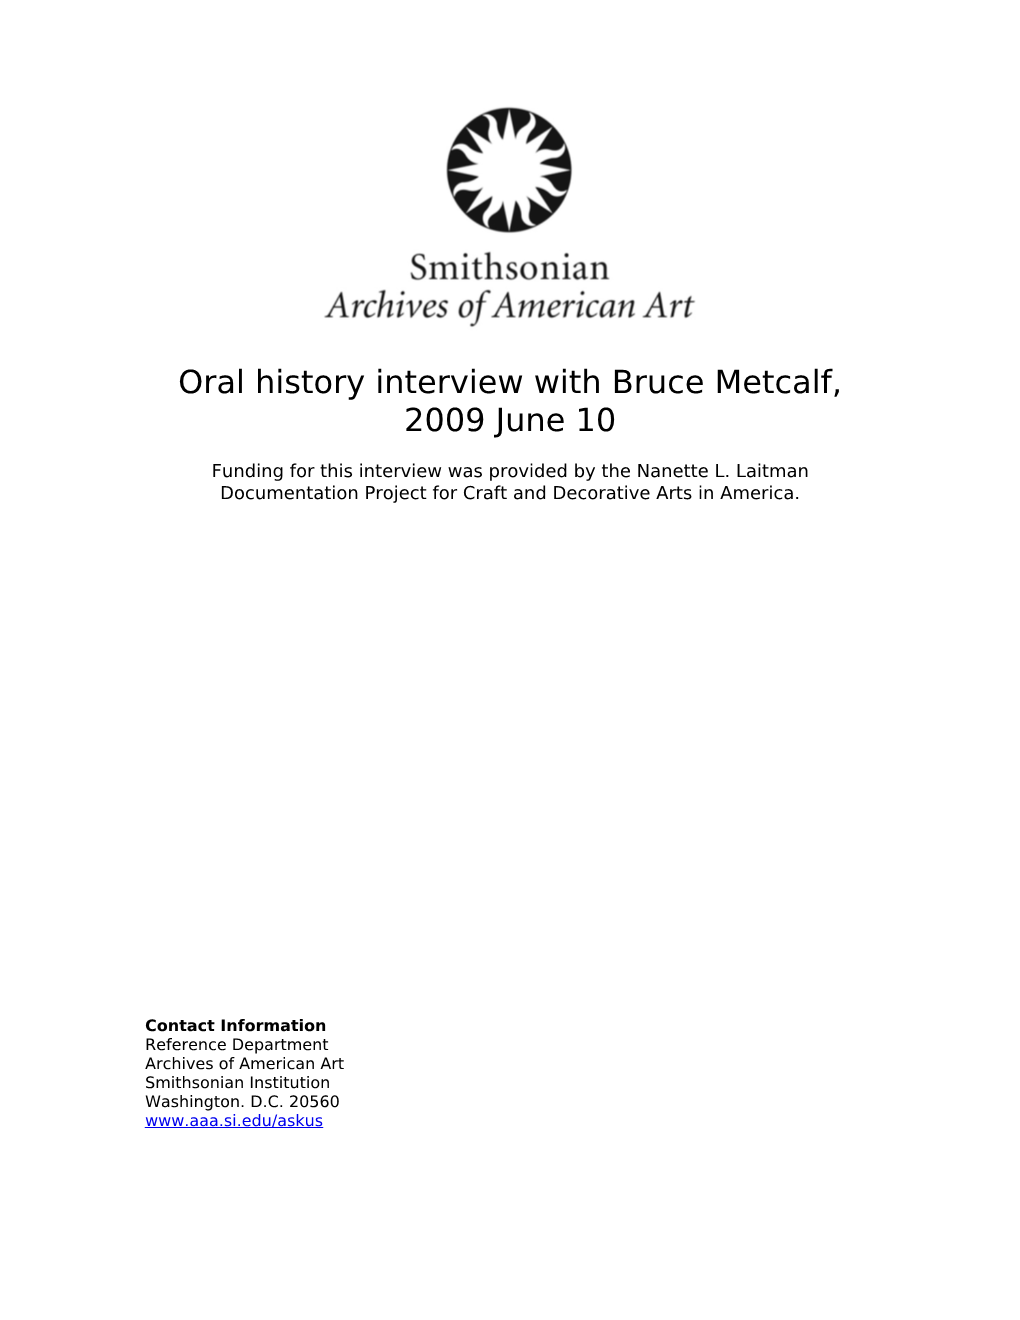 Oral History Interview with Bruce Metcalf, 2009 June 10